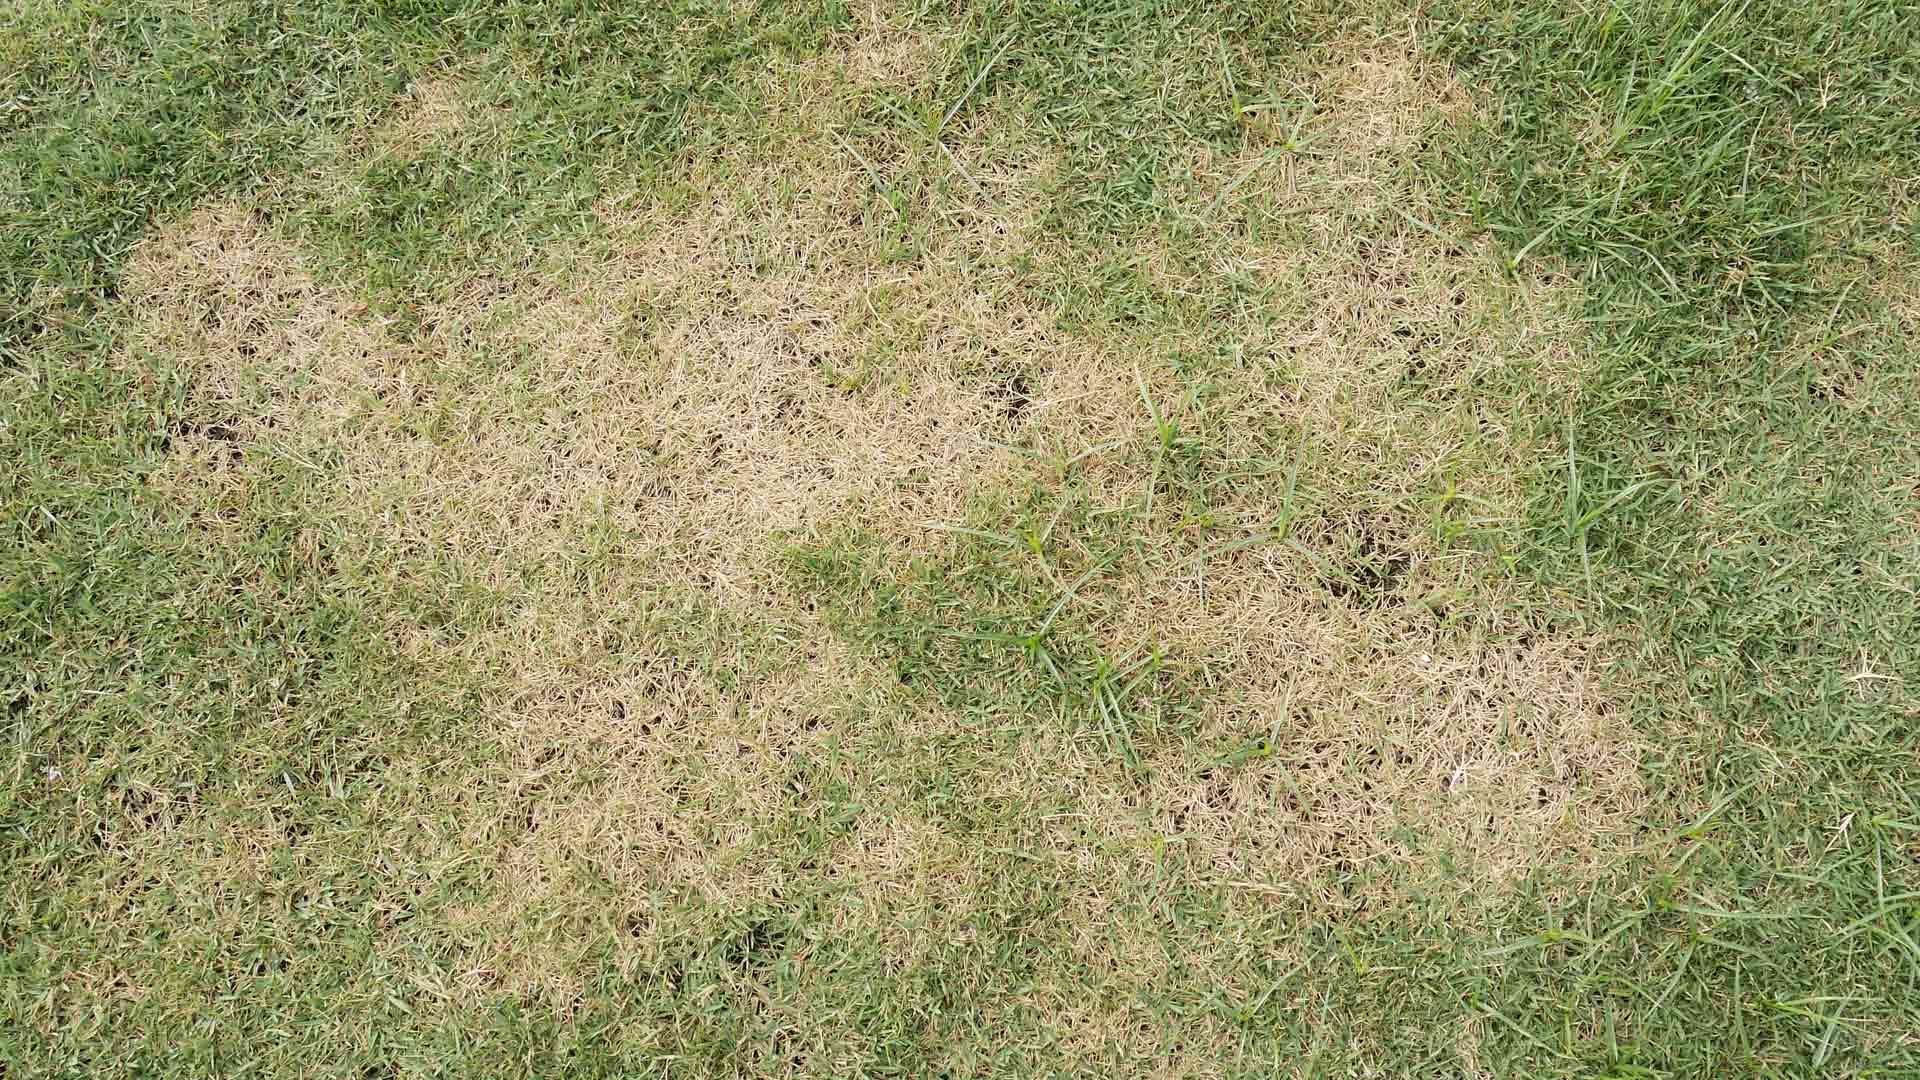 Brown patch diseased lawn in Mansfield, OH.